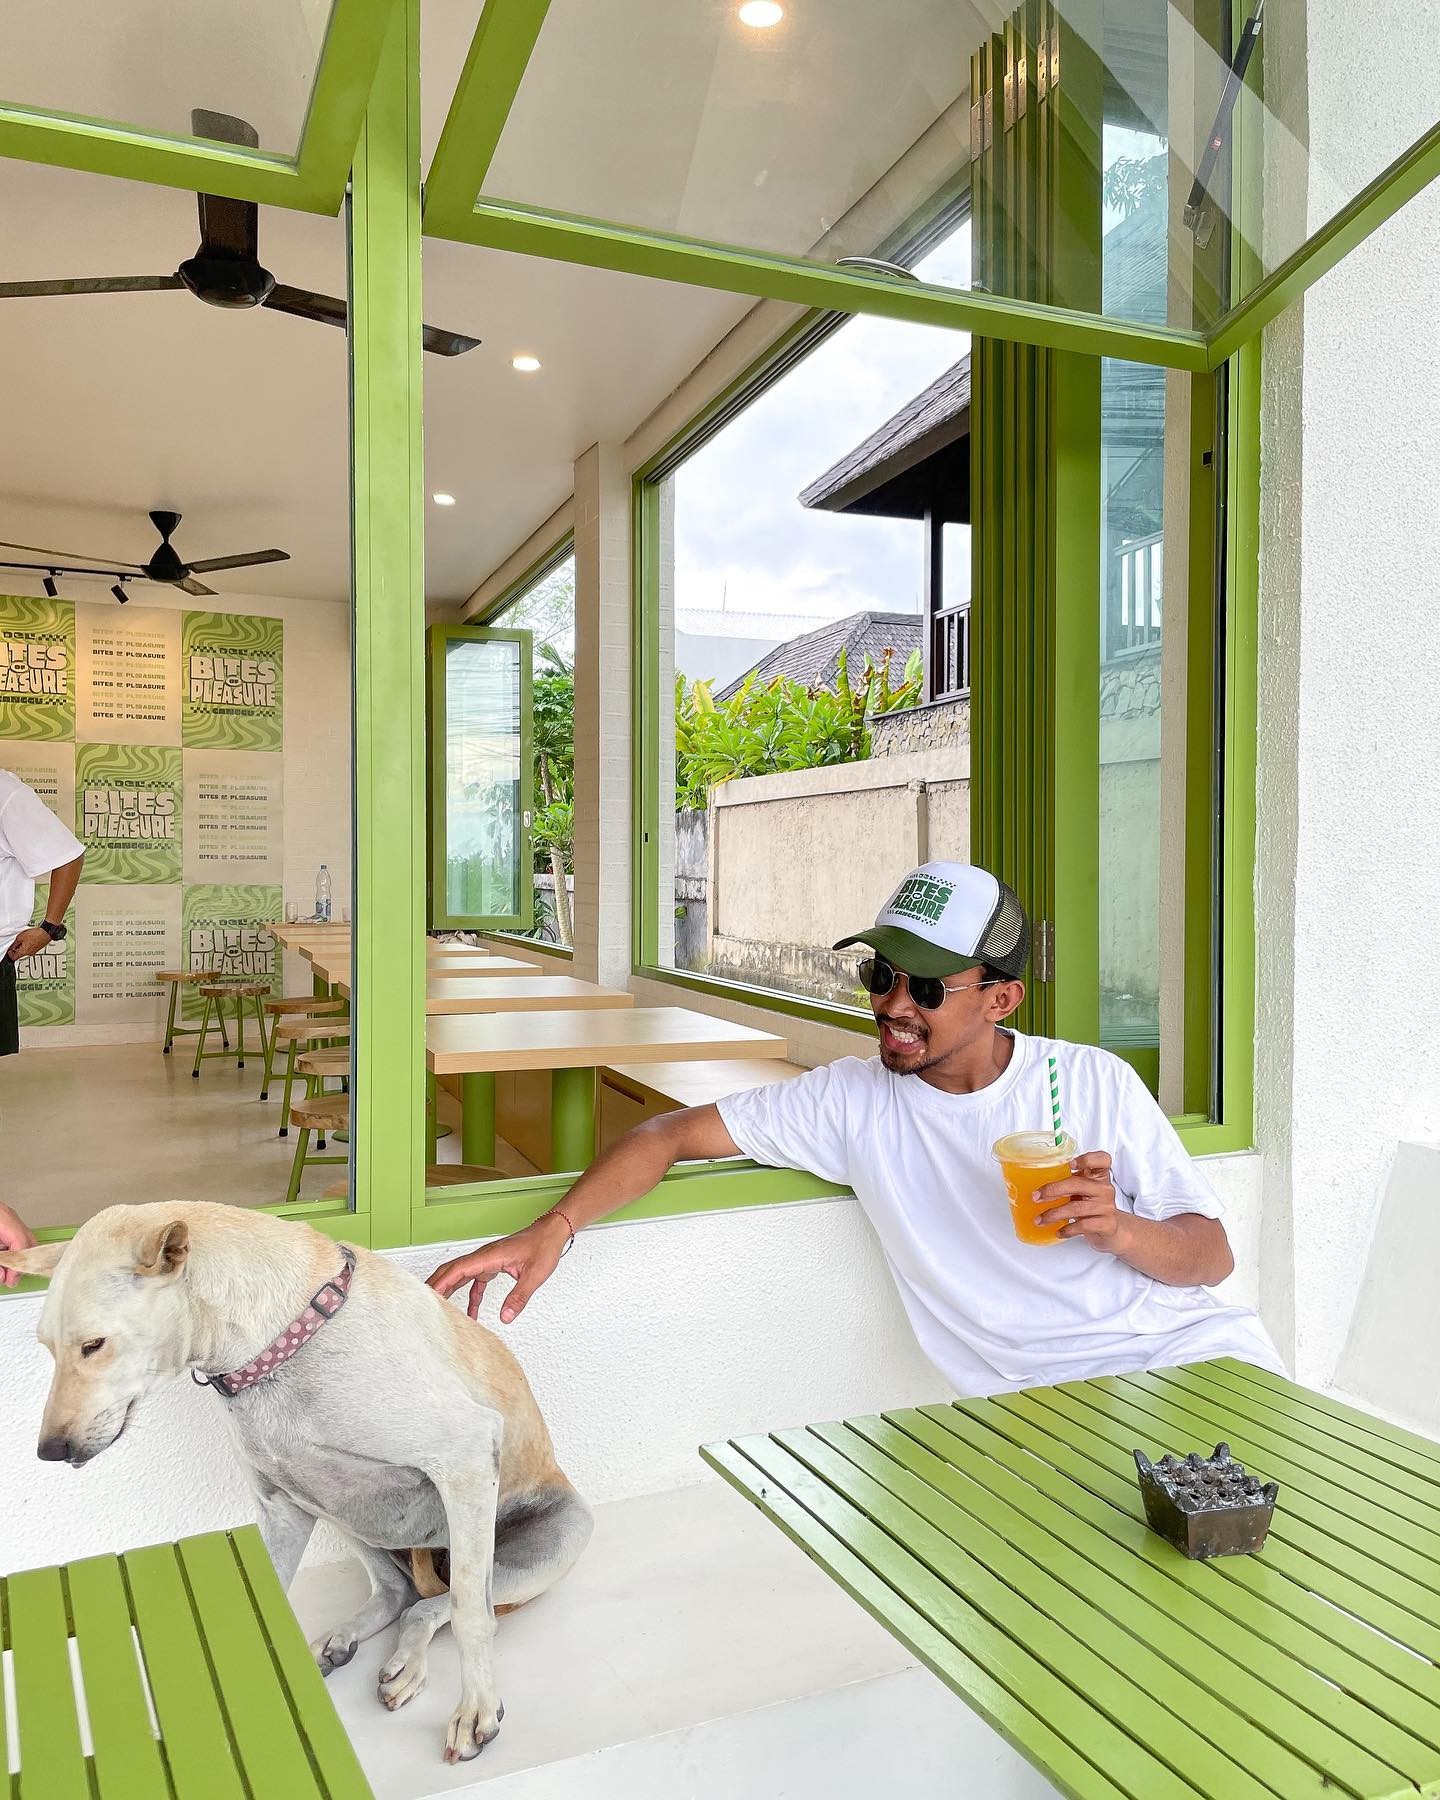 Bright cafe interior with green frames, white walls decorated with neon prints, and outdoor seating area with green tables.